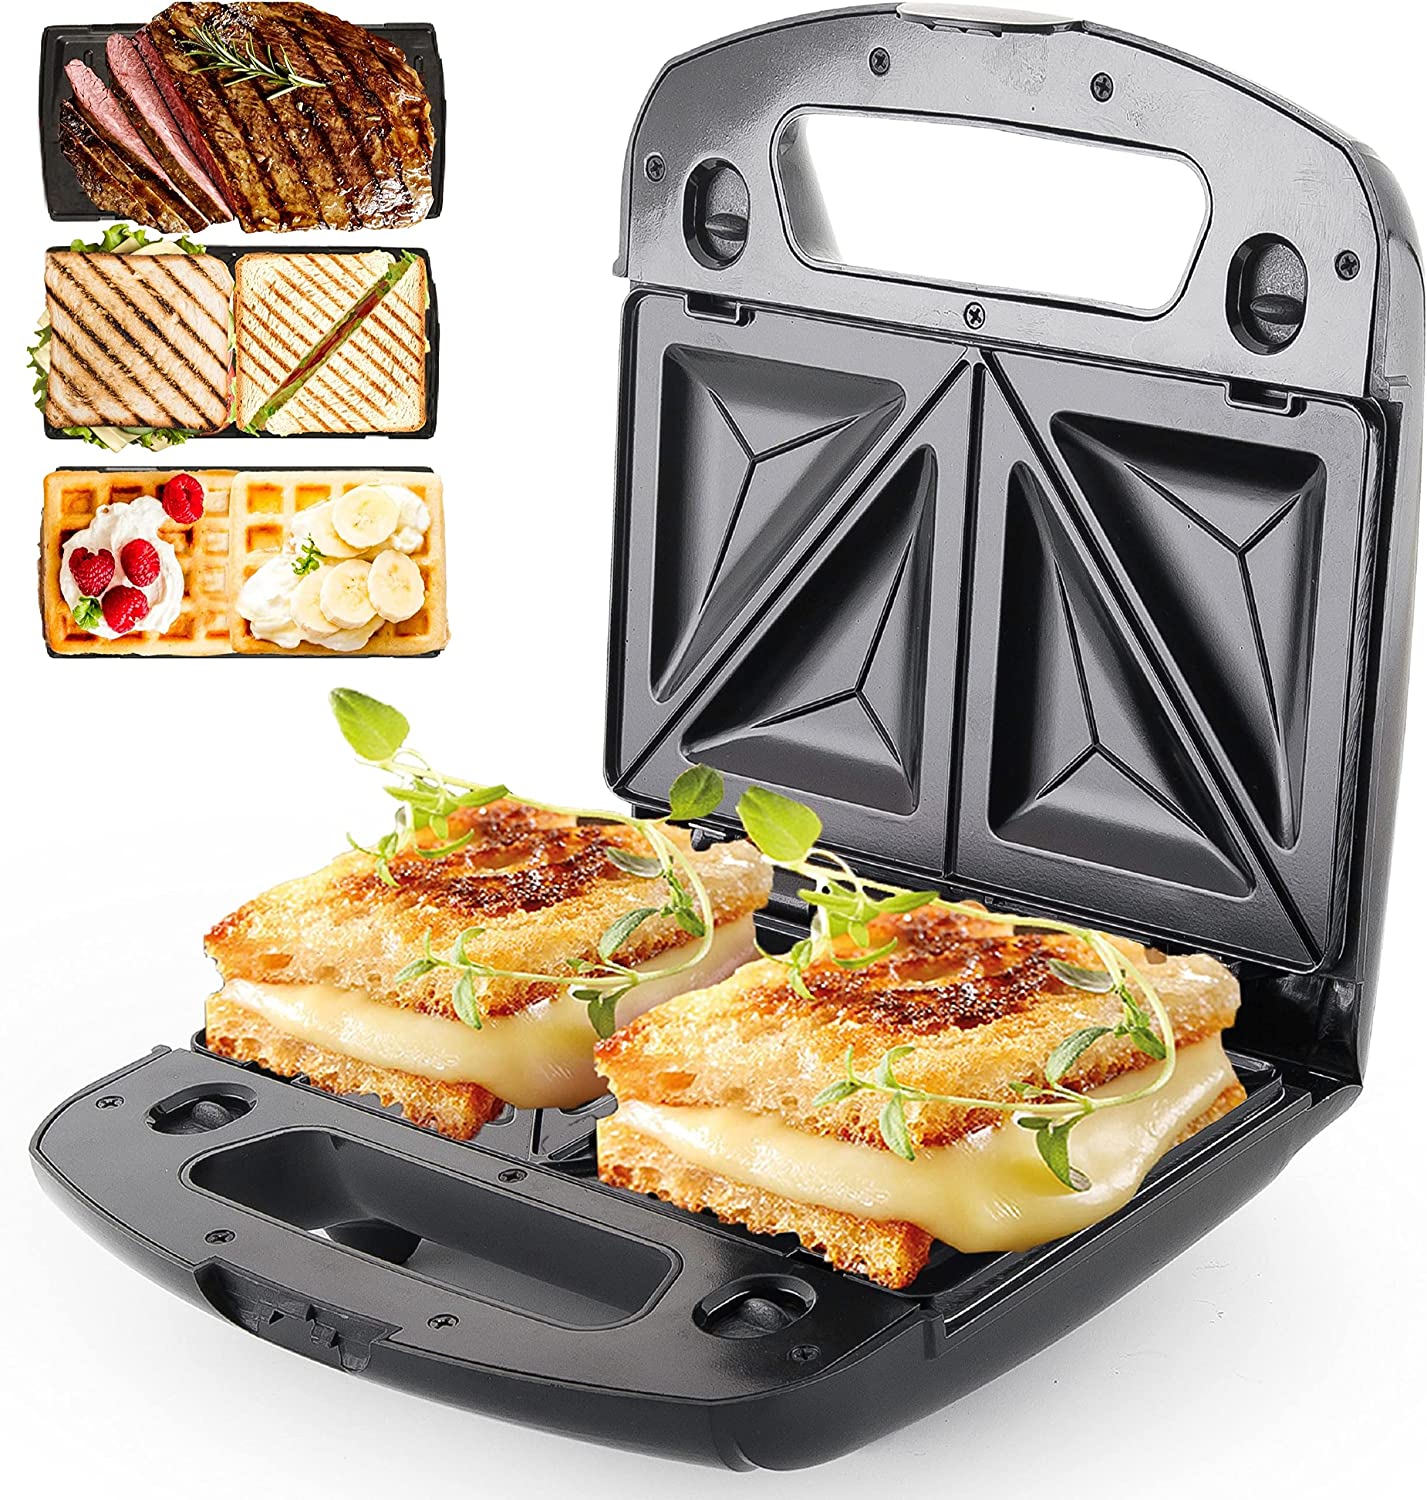 3-in-1 sandwich maker, interchangeable plates, stainless steel contact grill, waffle iron, multi-grill, sandwich maker, contact grill, stainless steel, waffle iron, electric grill